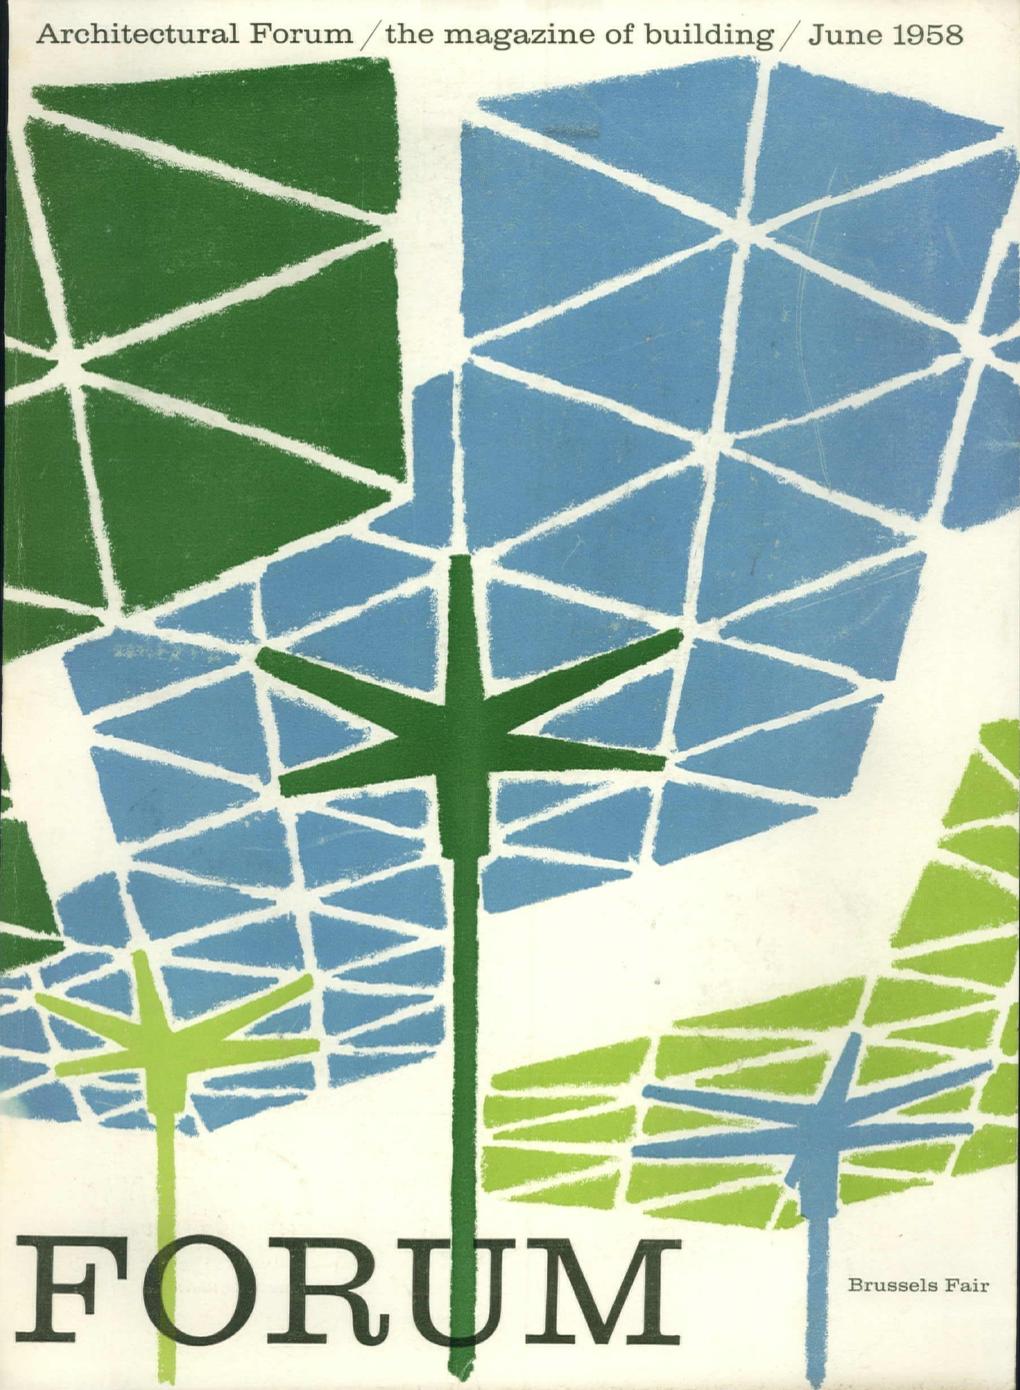 Cover of Architectural Forum magazine, depicting the pavilion in blue and green.